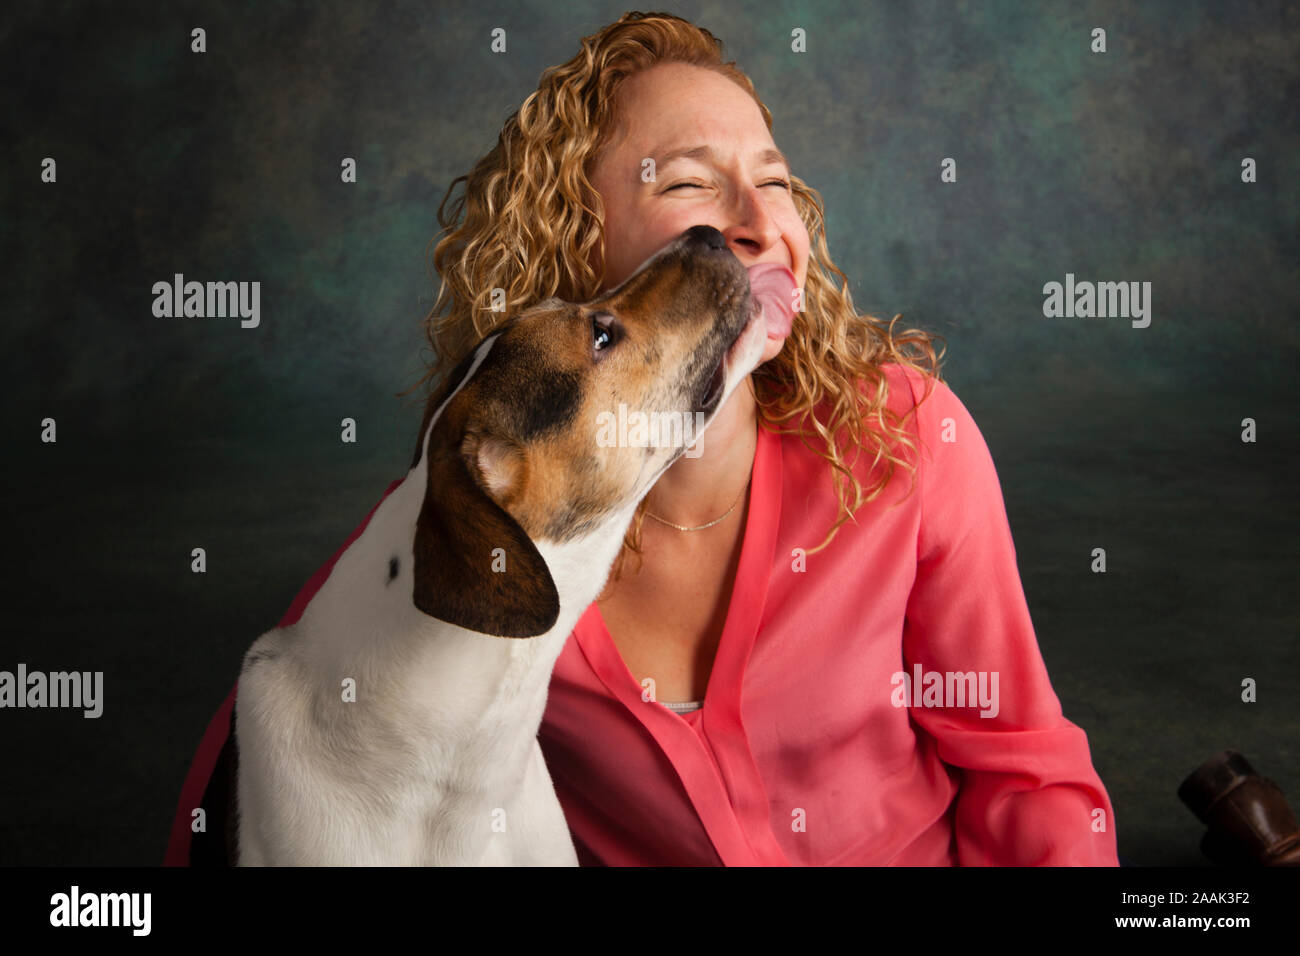 Studio shot of mixed breed dog licking smiling woman's face Stock Photo